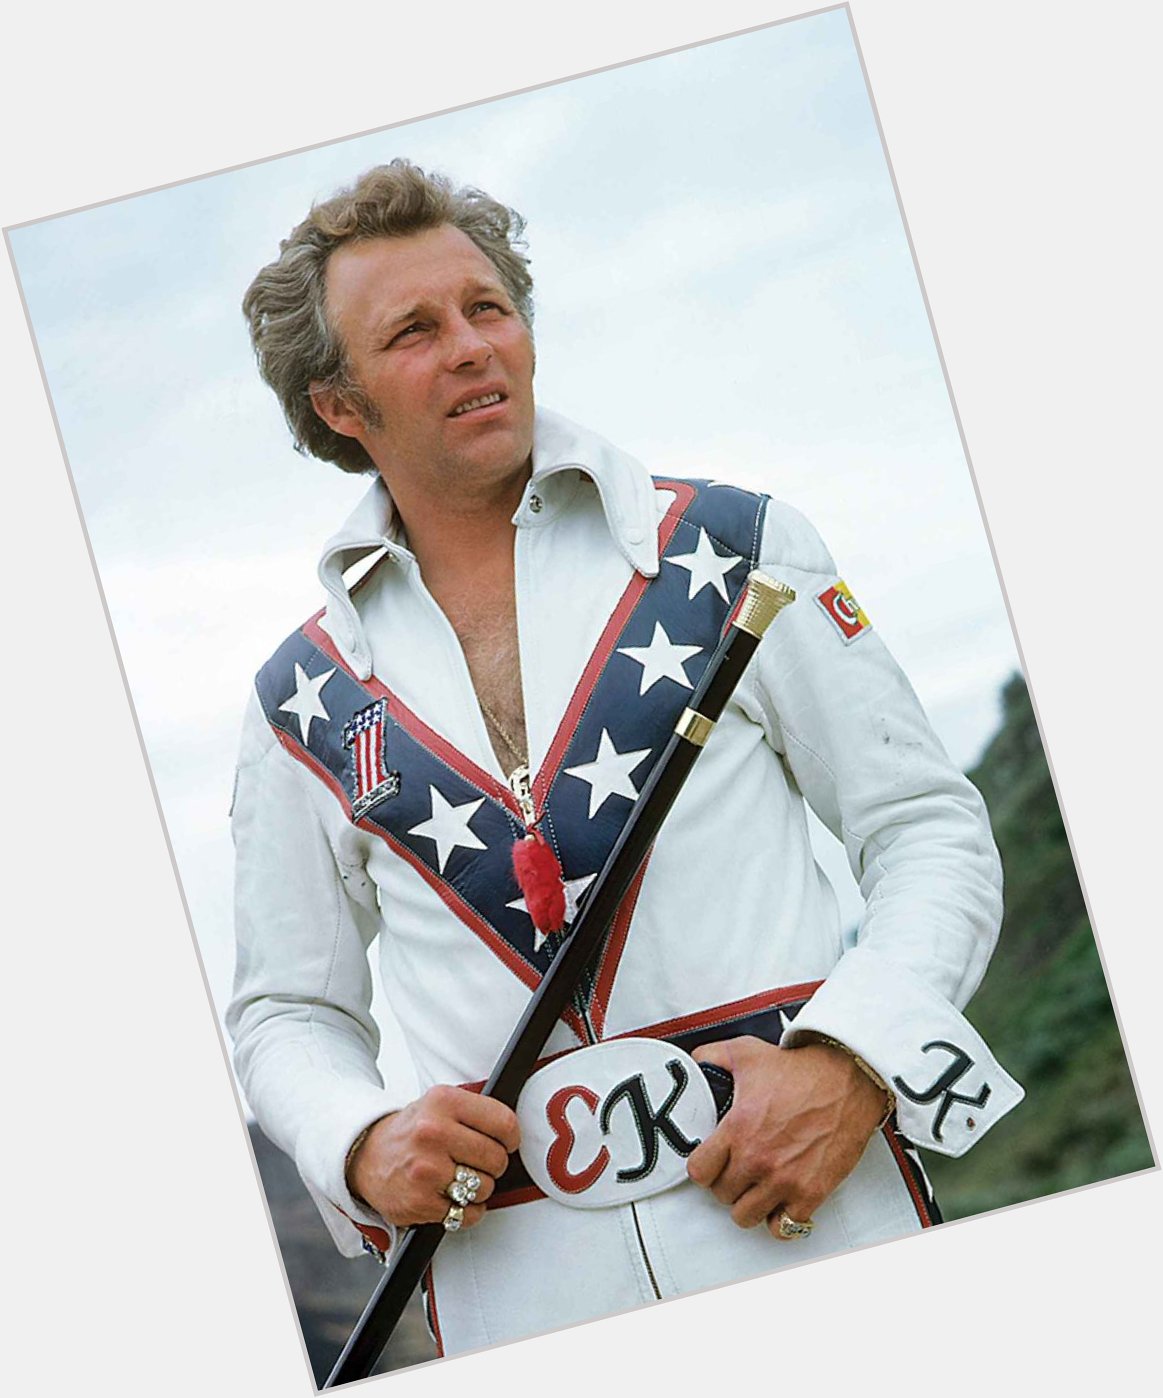 Anybody can jump a motorcycle. The trouble begins when you try to land it. Evel Knievel
Happy Birthday 